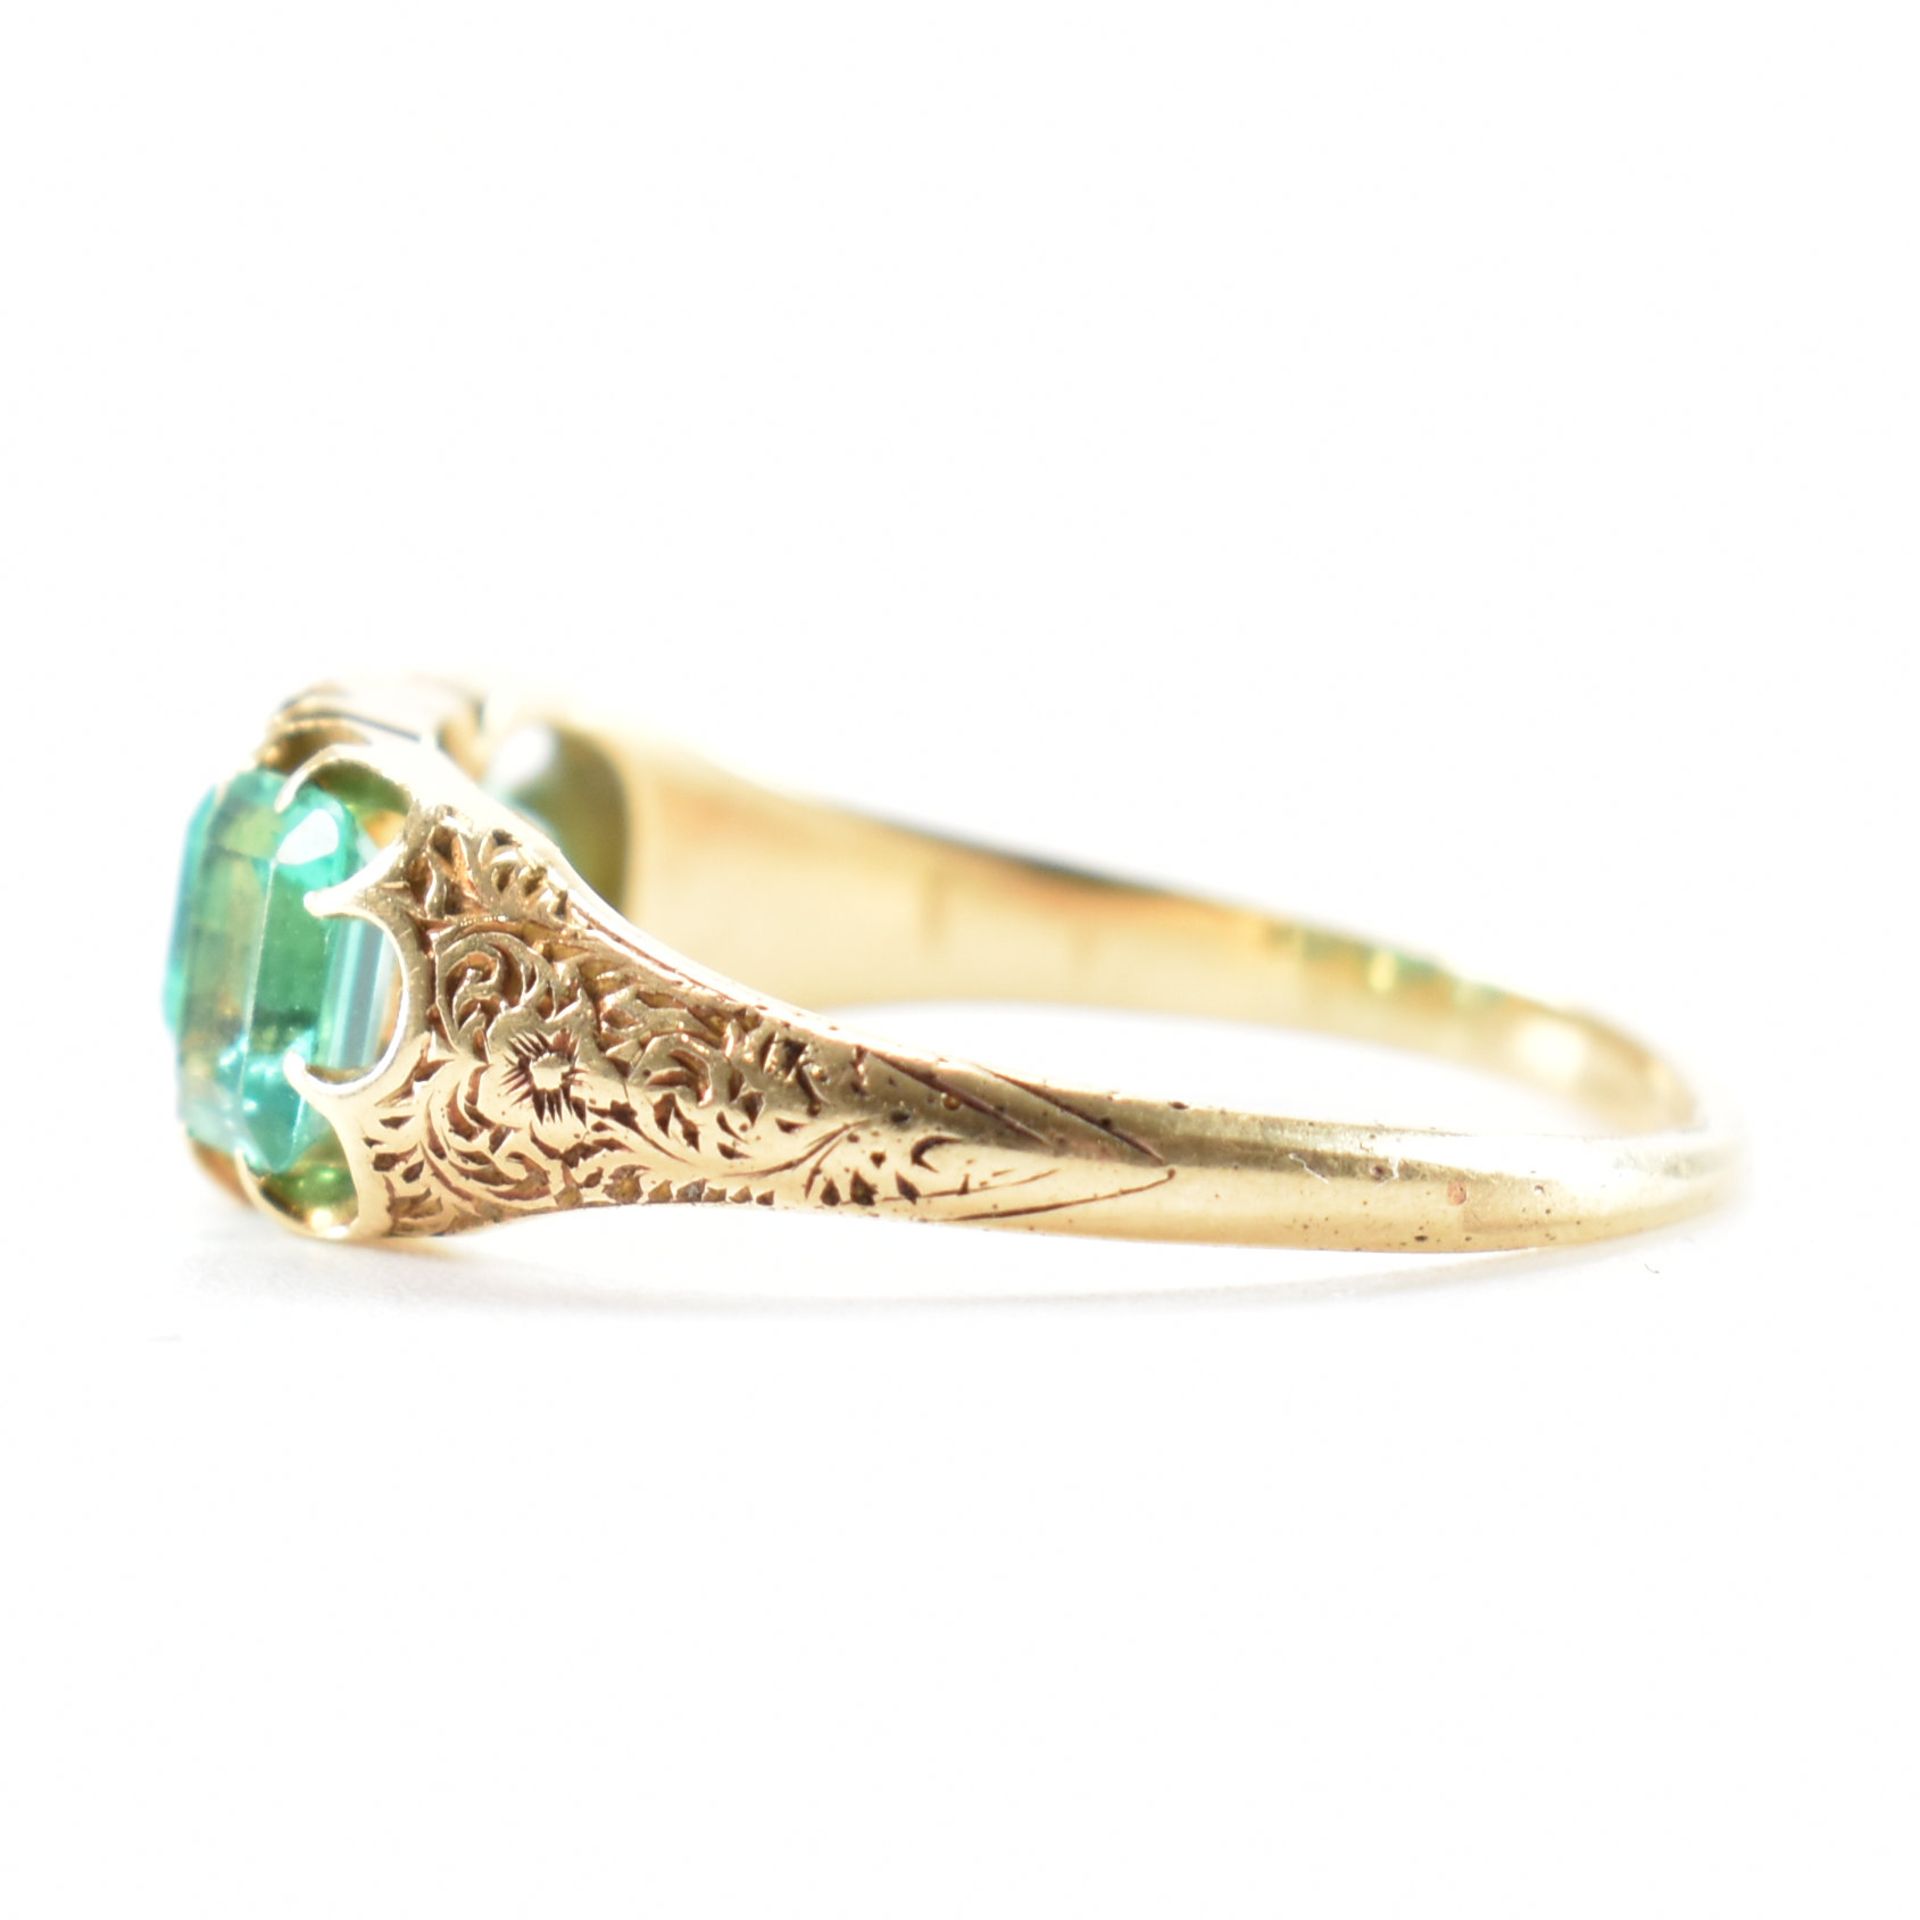 ANTIQUE GOLD & EMERALD 3 STONE RING - Image 2 of 7